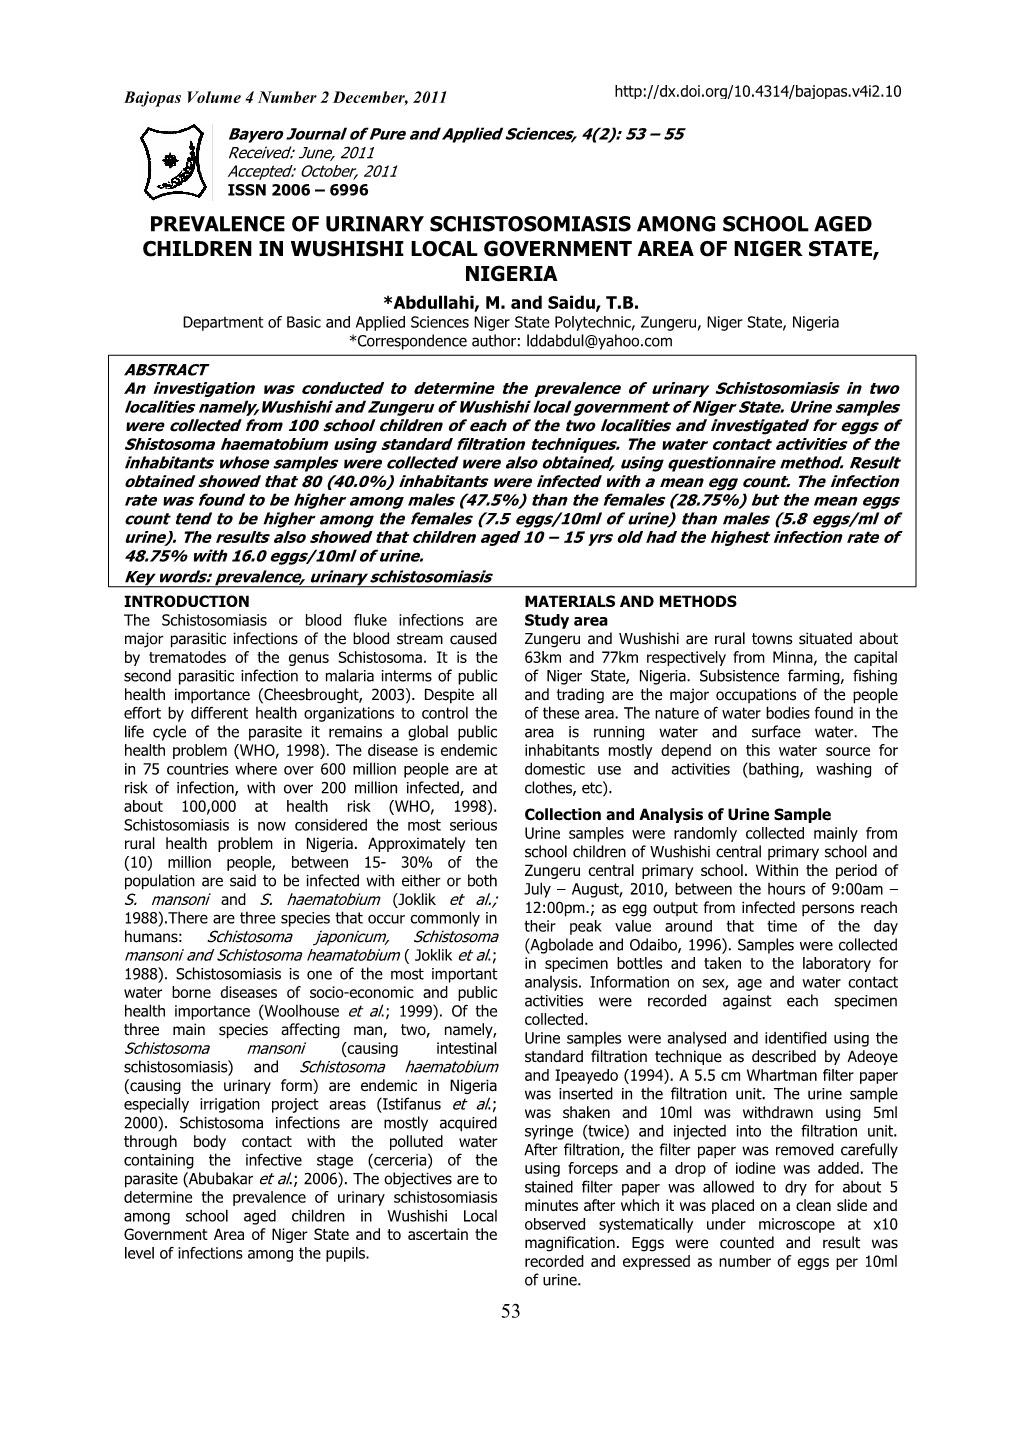 Prevalence of Urinary Schistosomiasis Among School Aged Children in Wushishi Local Government Area of Niger State, Nigeria